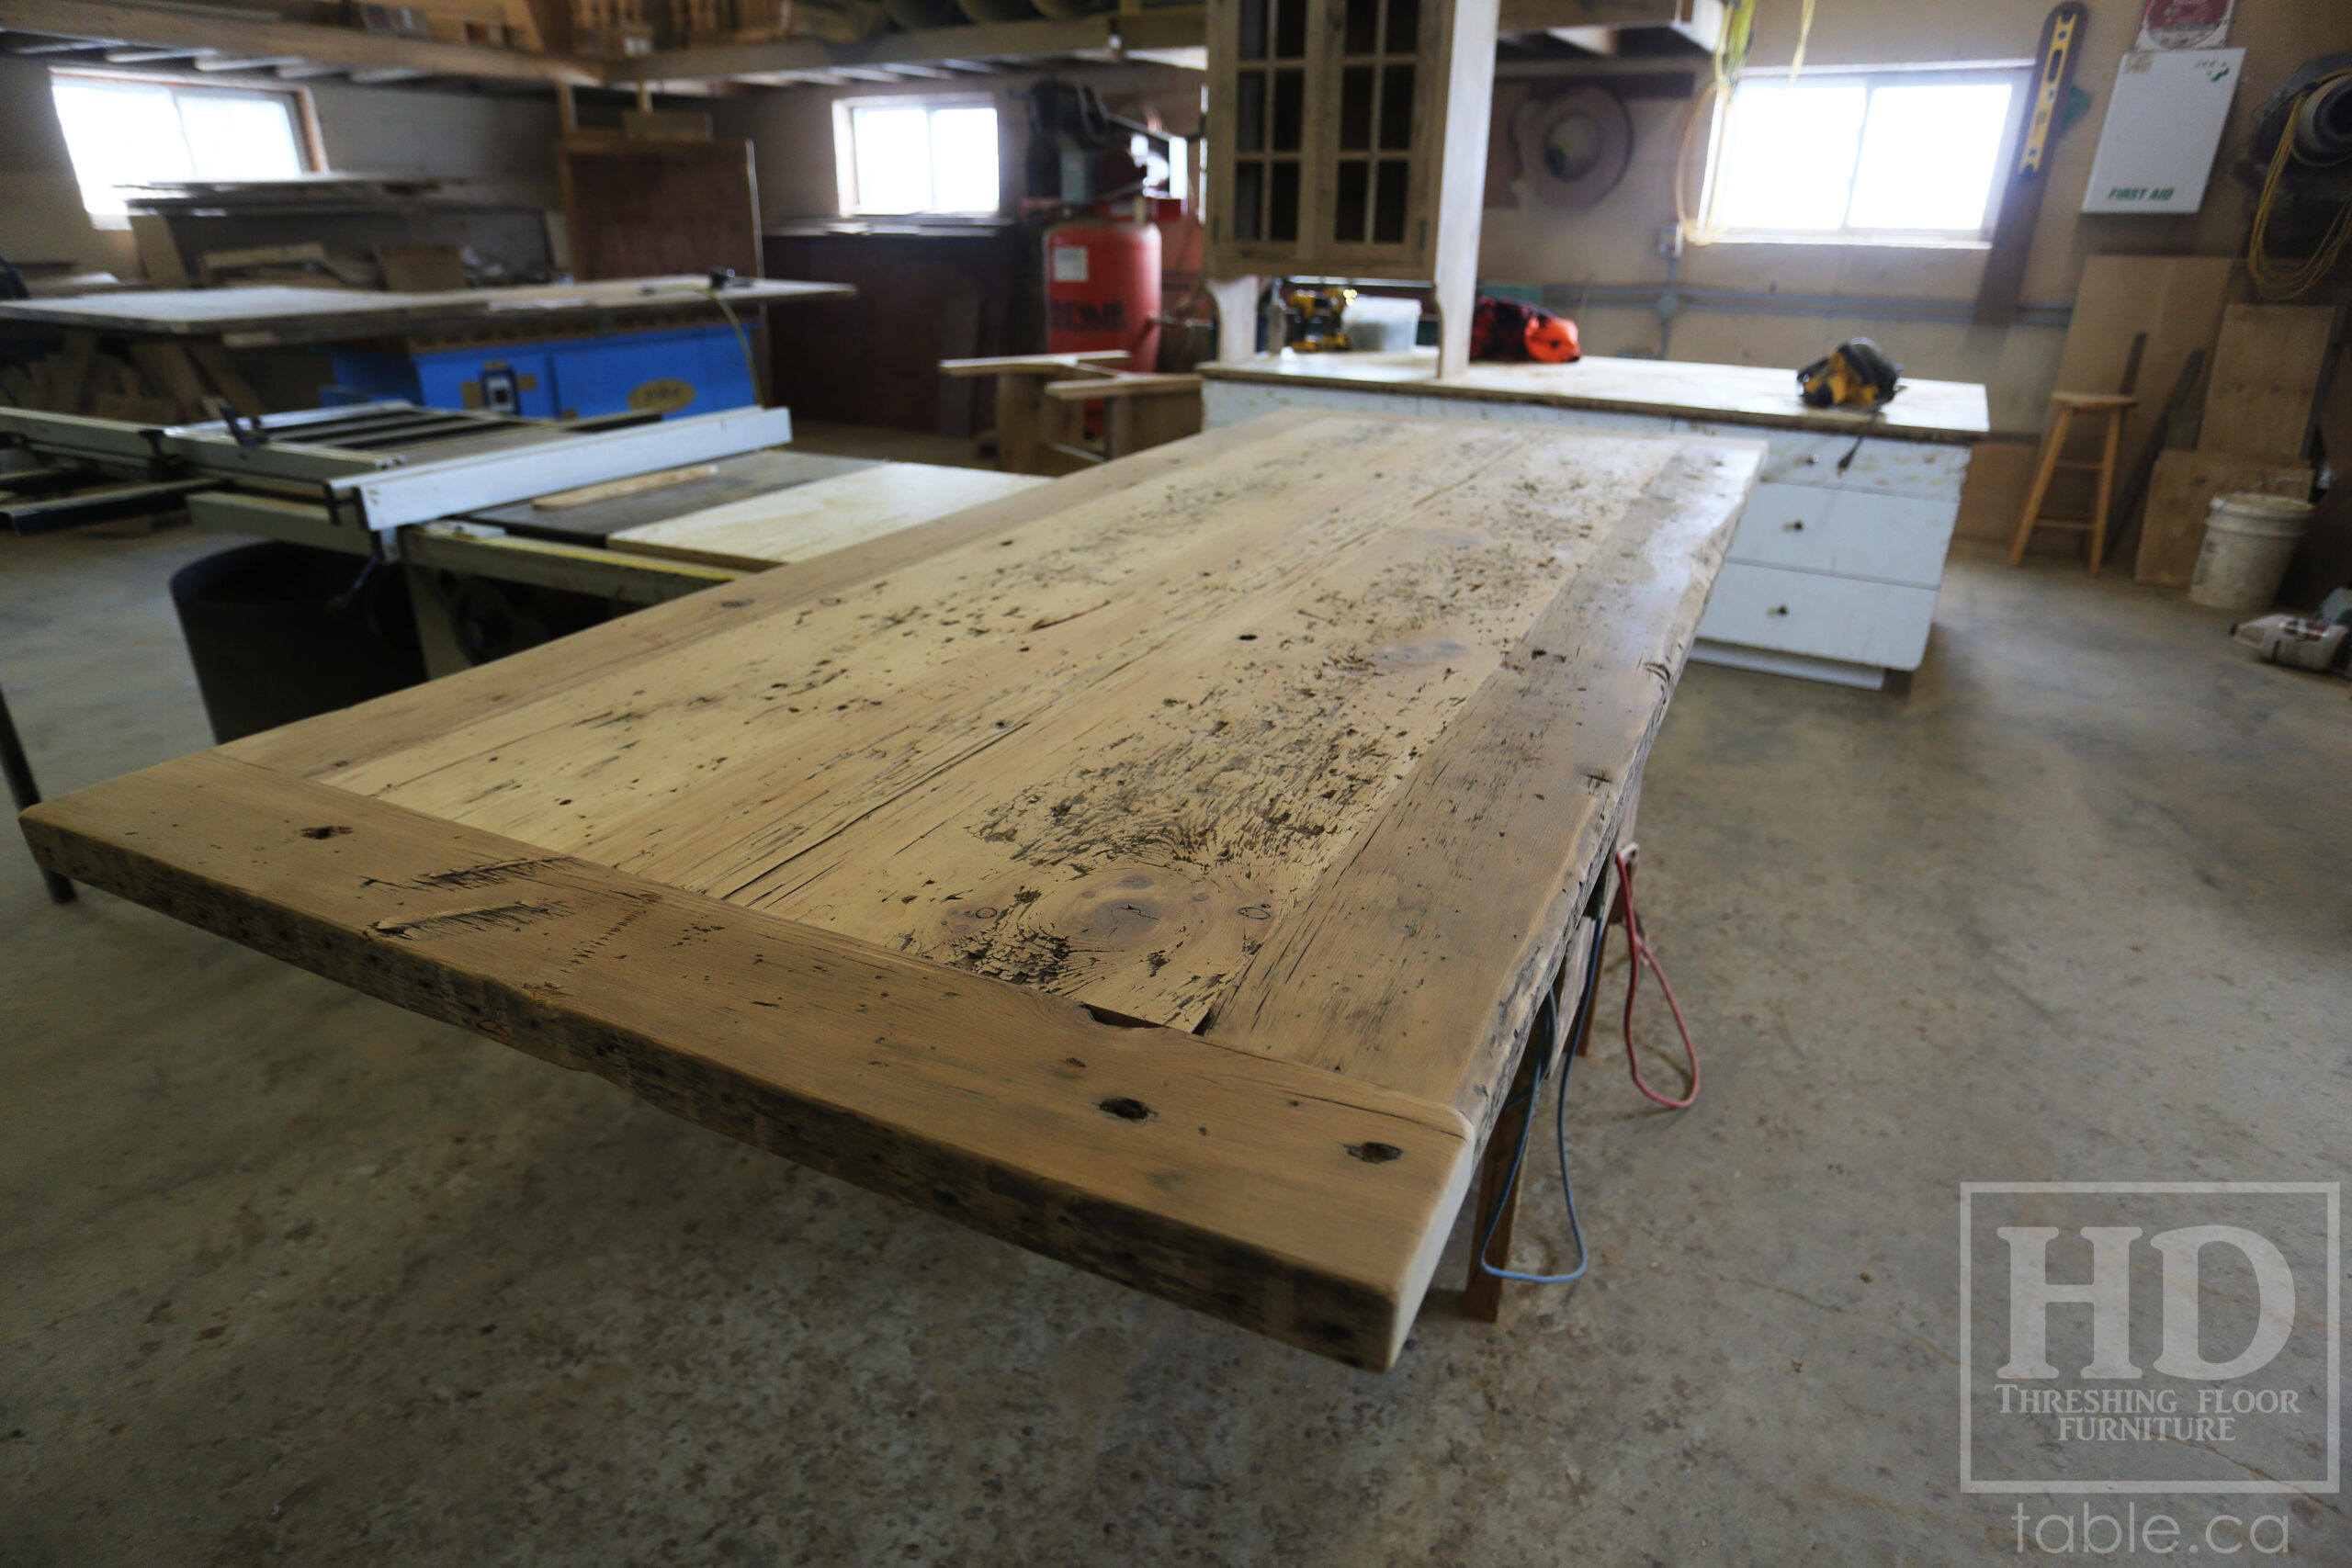 8' Ontario Barnwood Wood Table we made for an Oakville, Ontario home - 39" wide – Modern Plank Base – Reclaimed Old Growth Hemlock Threshing Floor Construction - Original edges & distressing maintained – Satin polyurethane finish [no epoxy filling] – www.table.ca